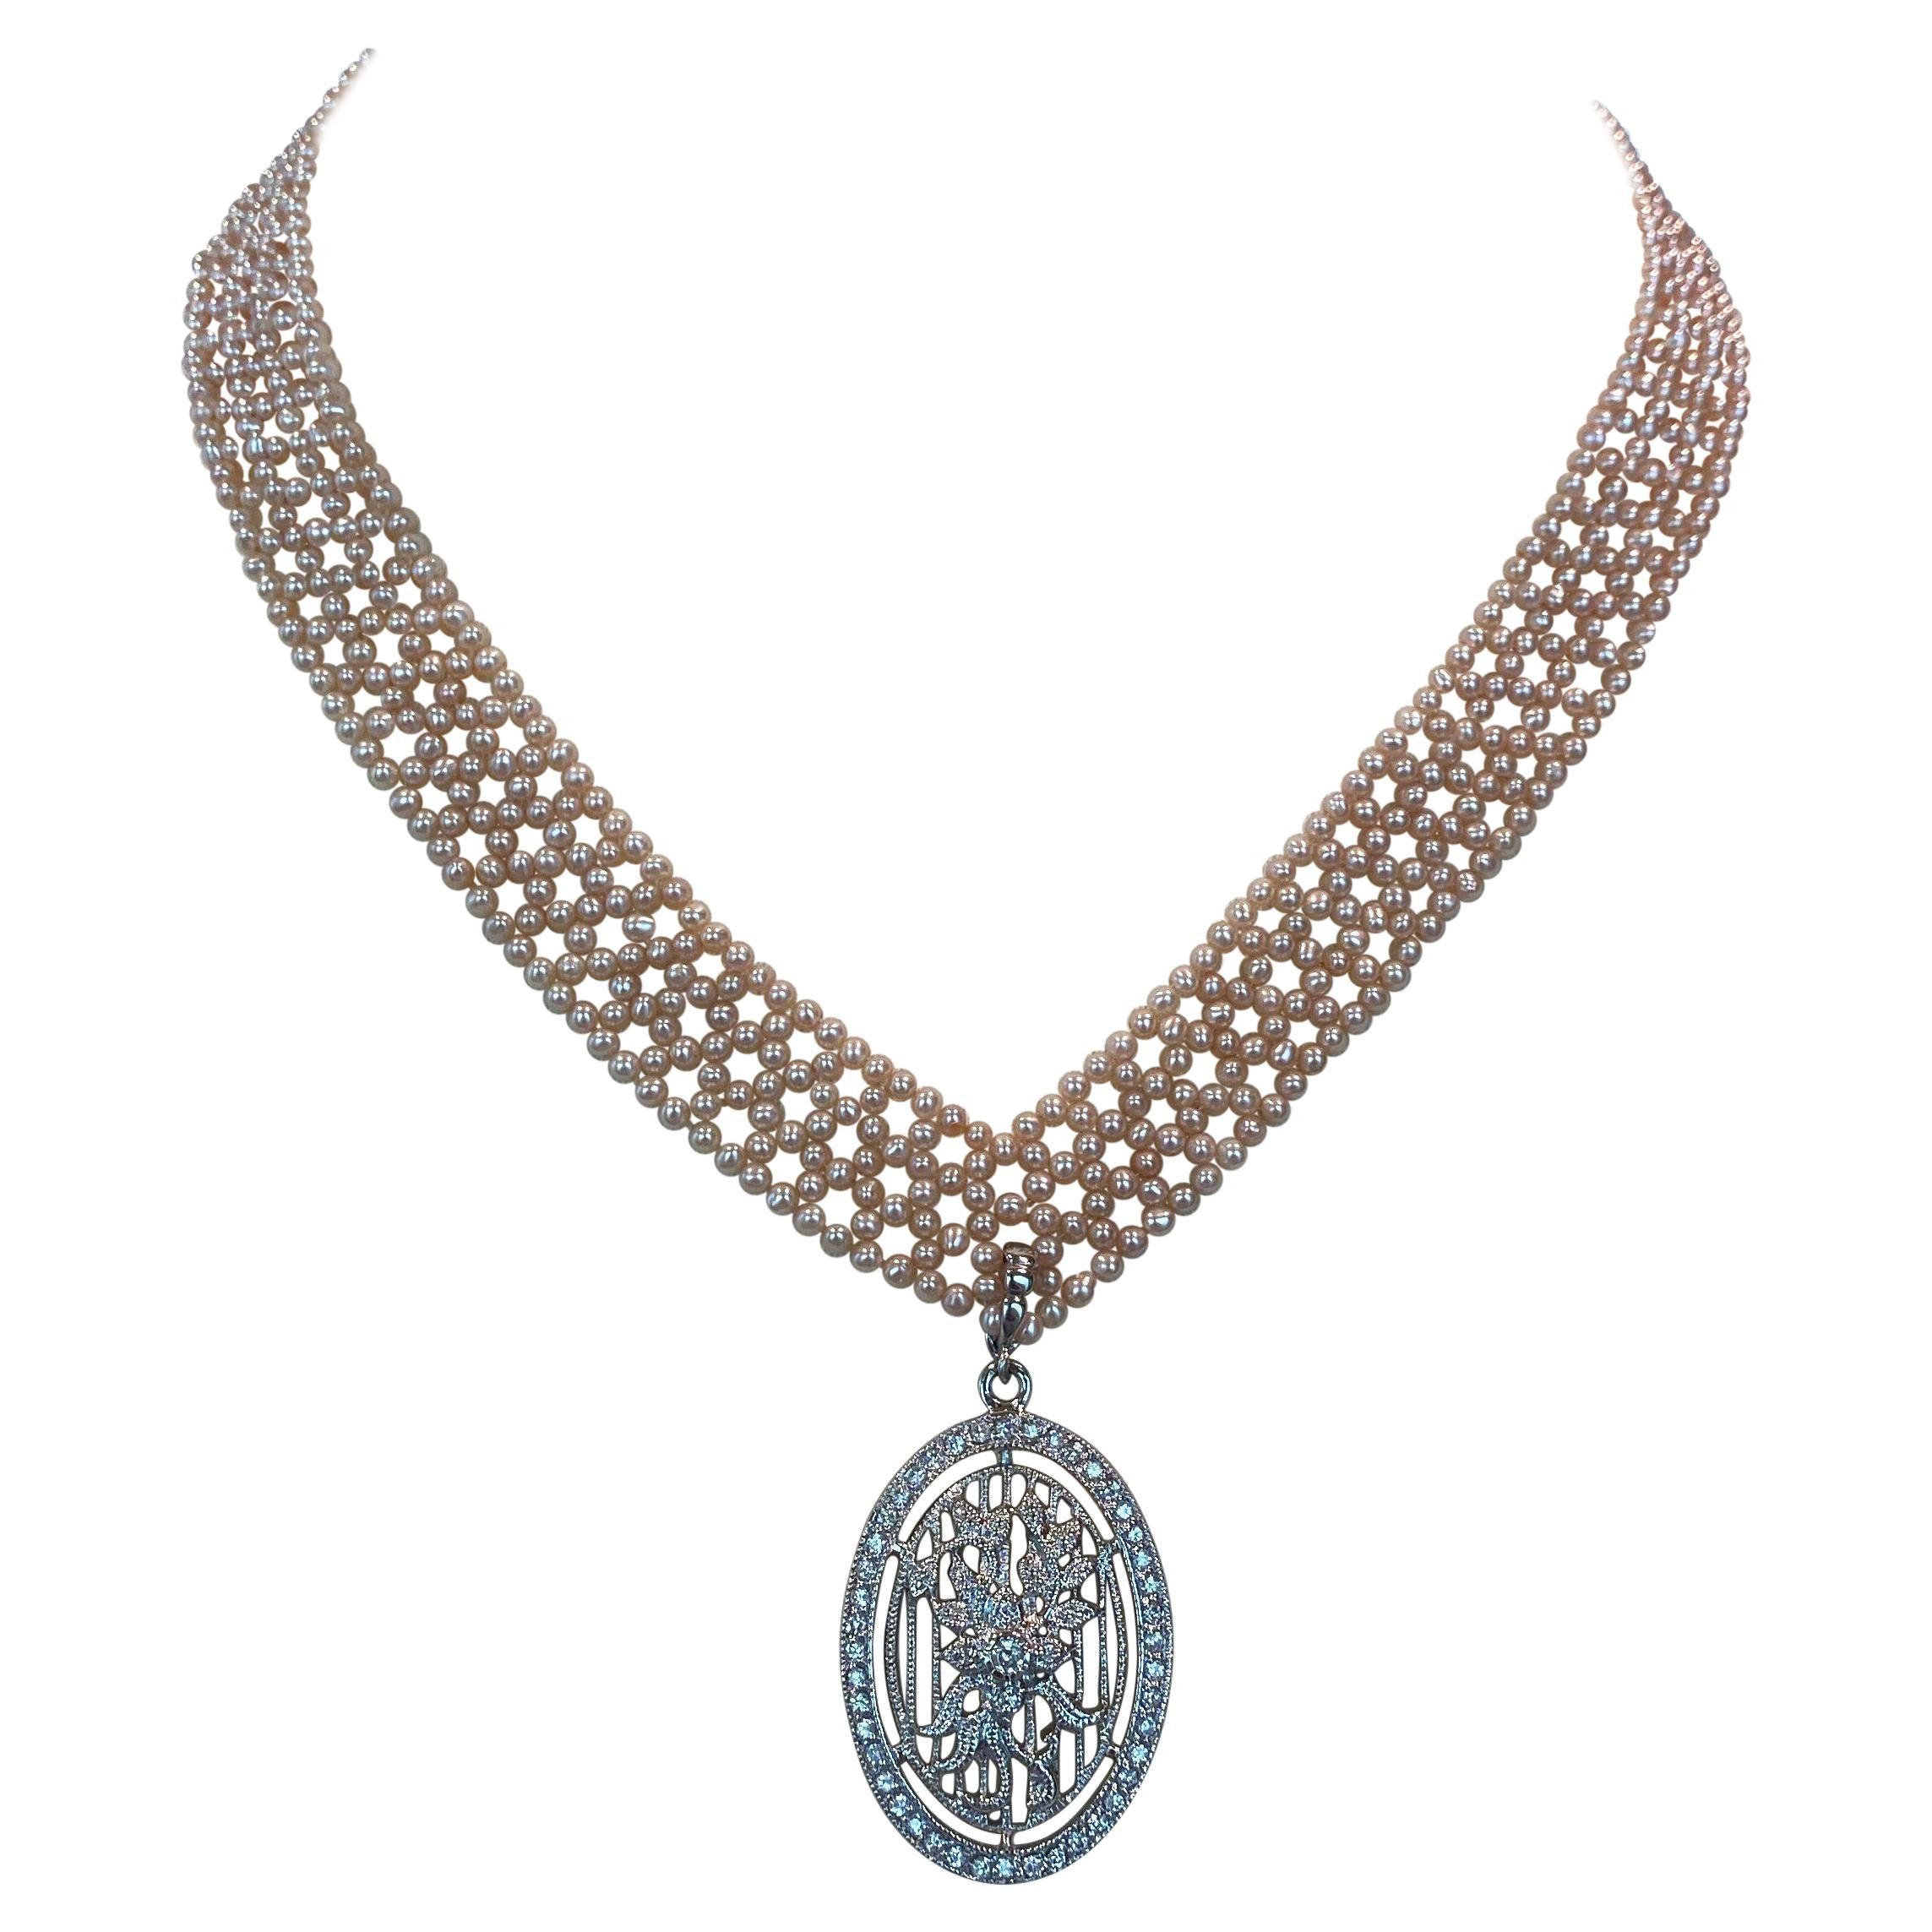 Marina J. Woven Pink Pearl "V" Necklace with 14k White Gold-Plated Sliding Clasp